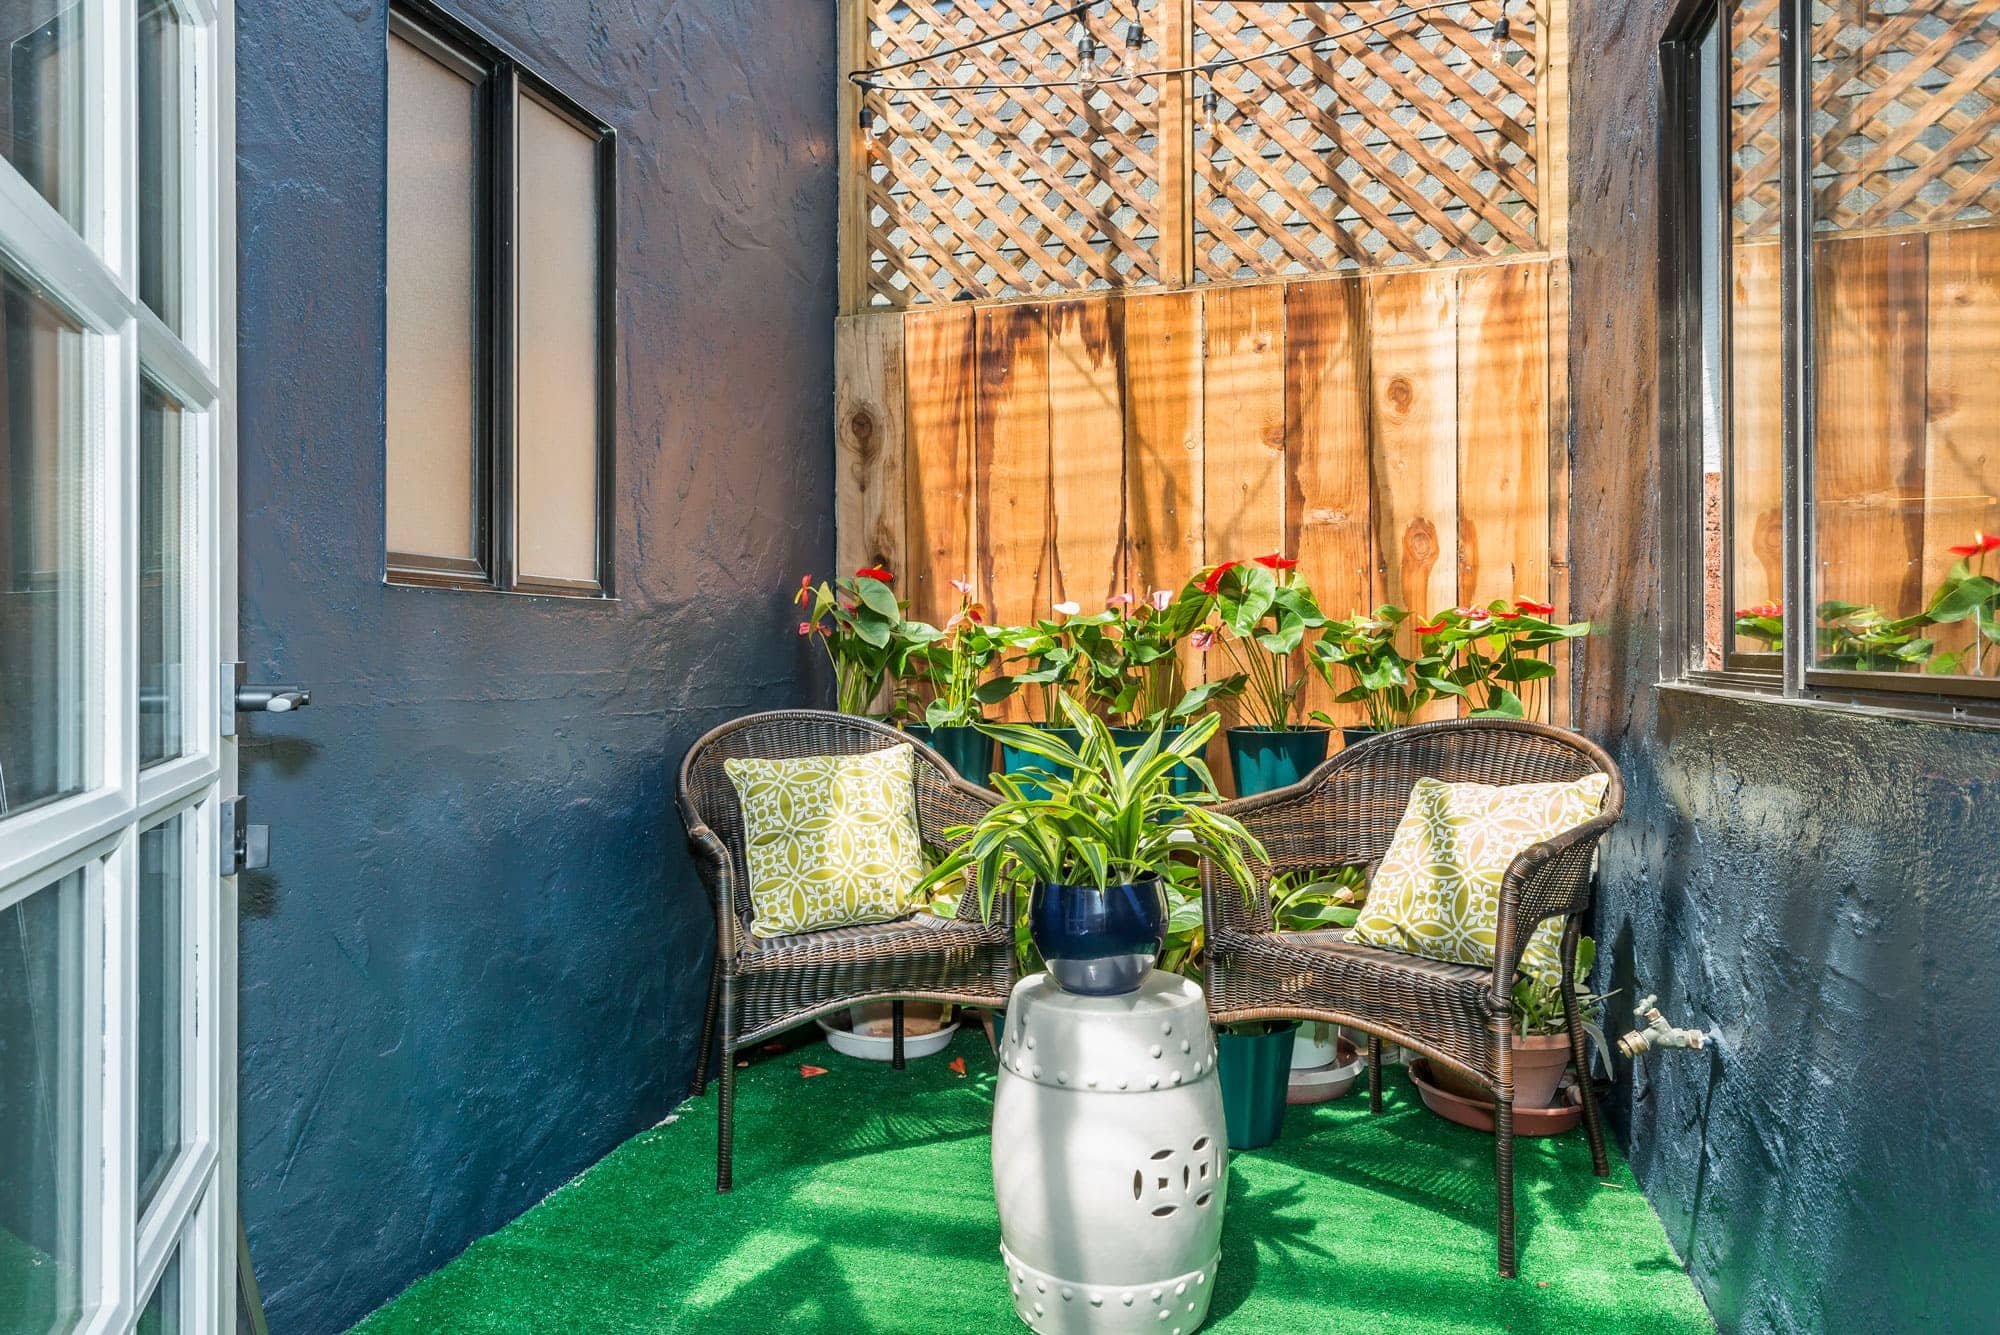 Enjoy 375's private deeded center patio is your little enclosed oasis complete with new overhead LED cable lights, astro turf and water tap for all those gardening projects.